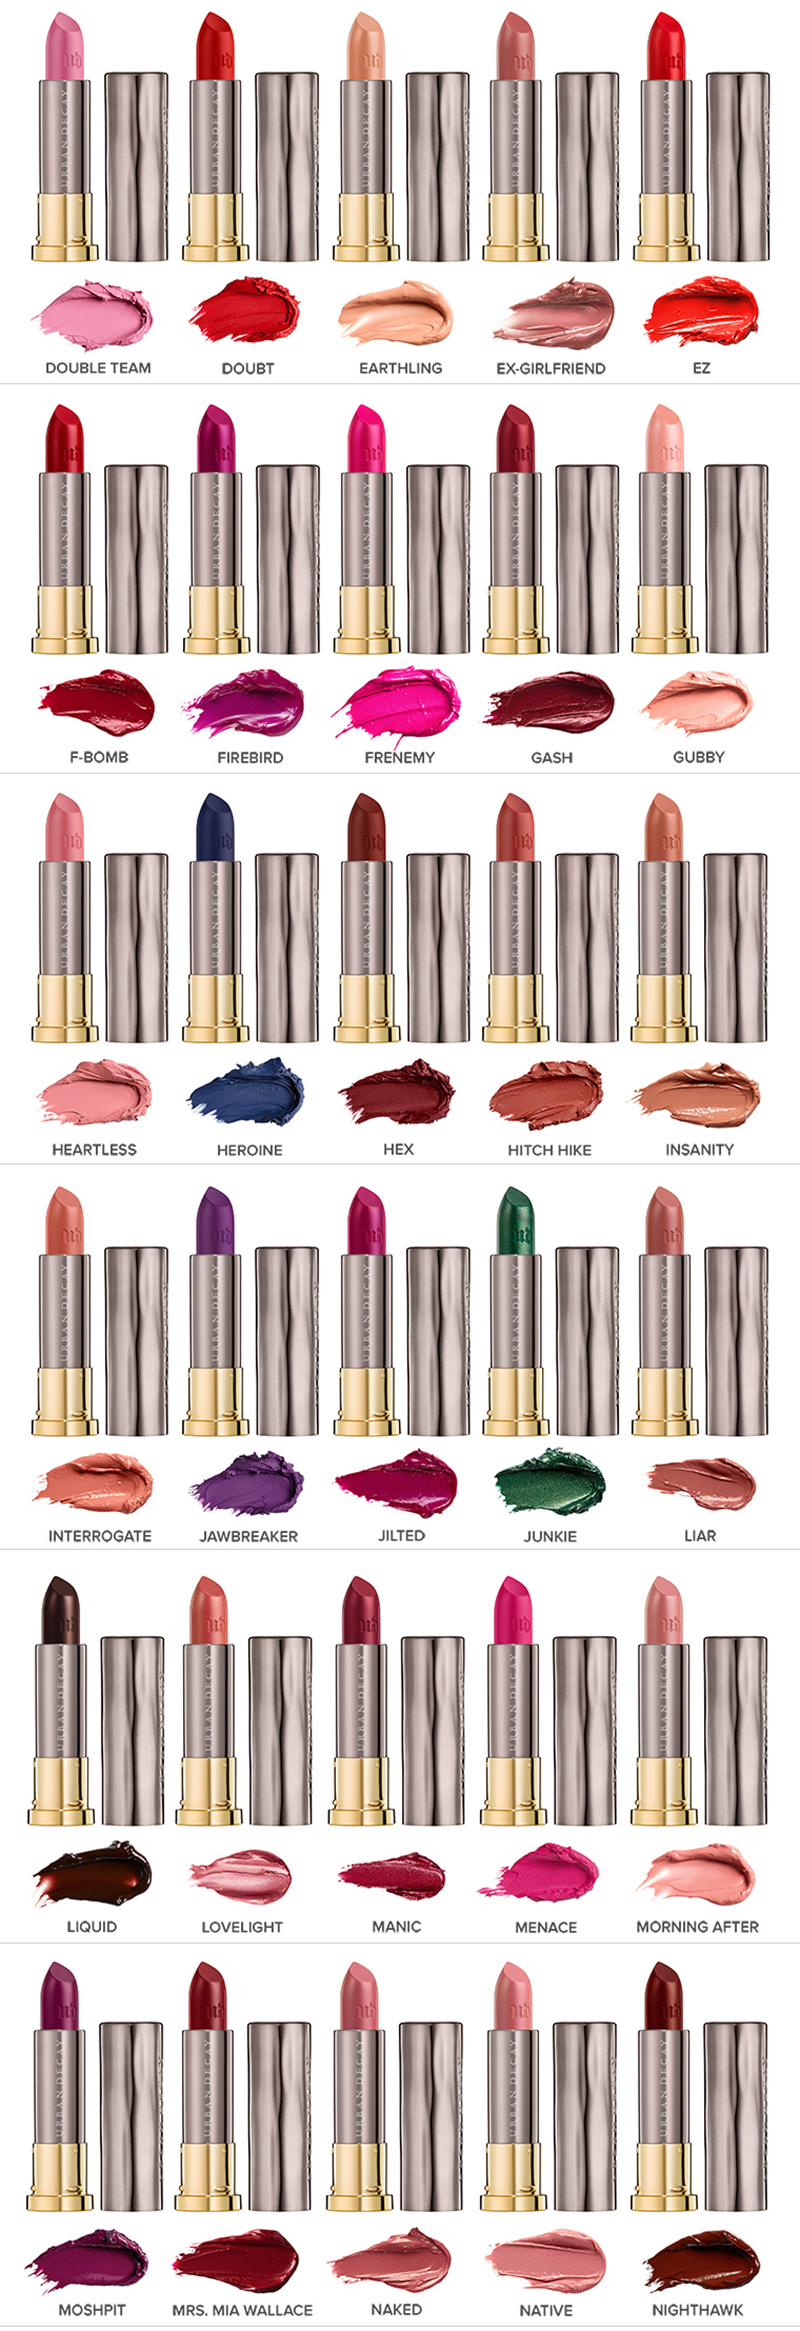 stylelab-beauty-blog-urban-decay-vice-lipstick-collection-3